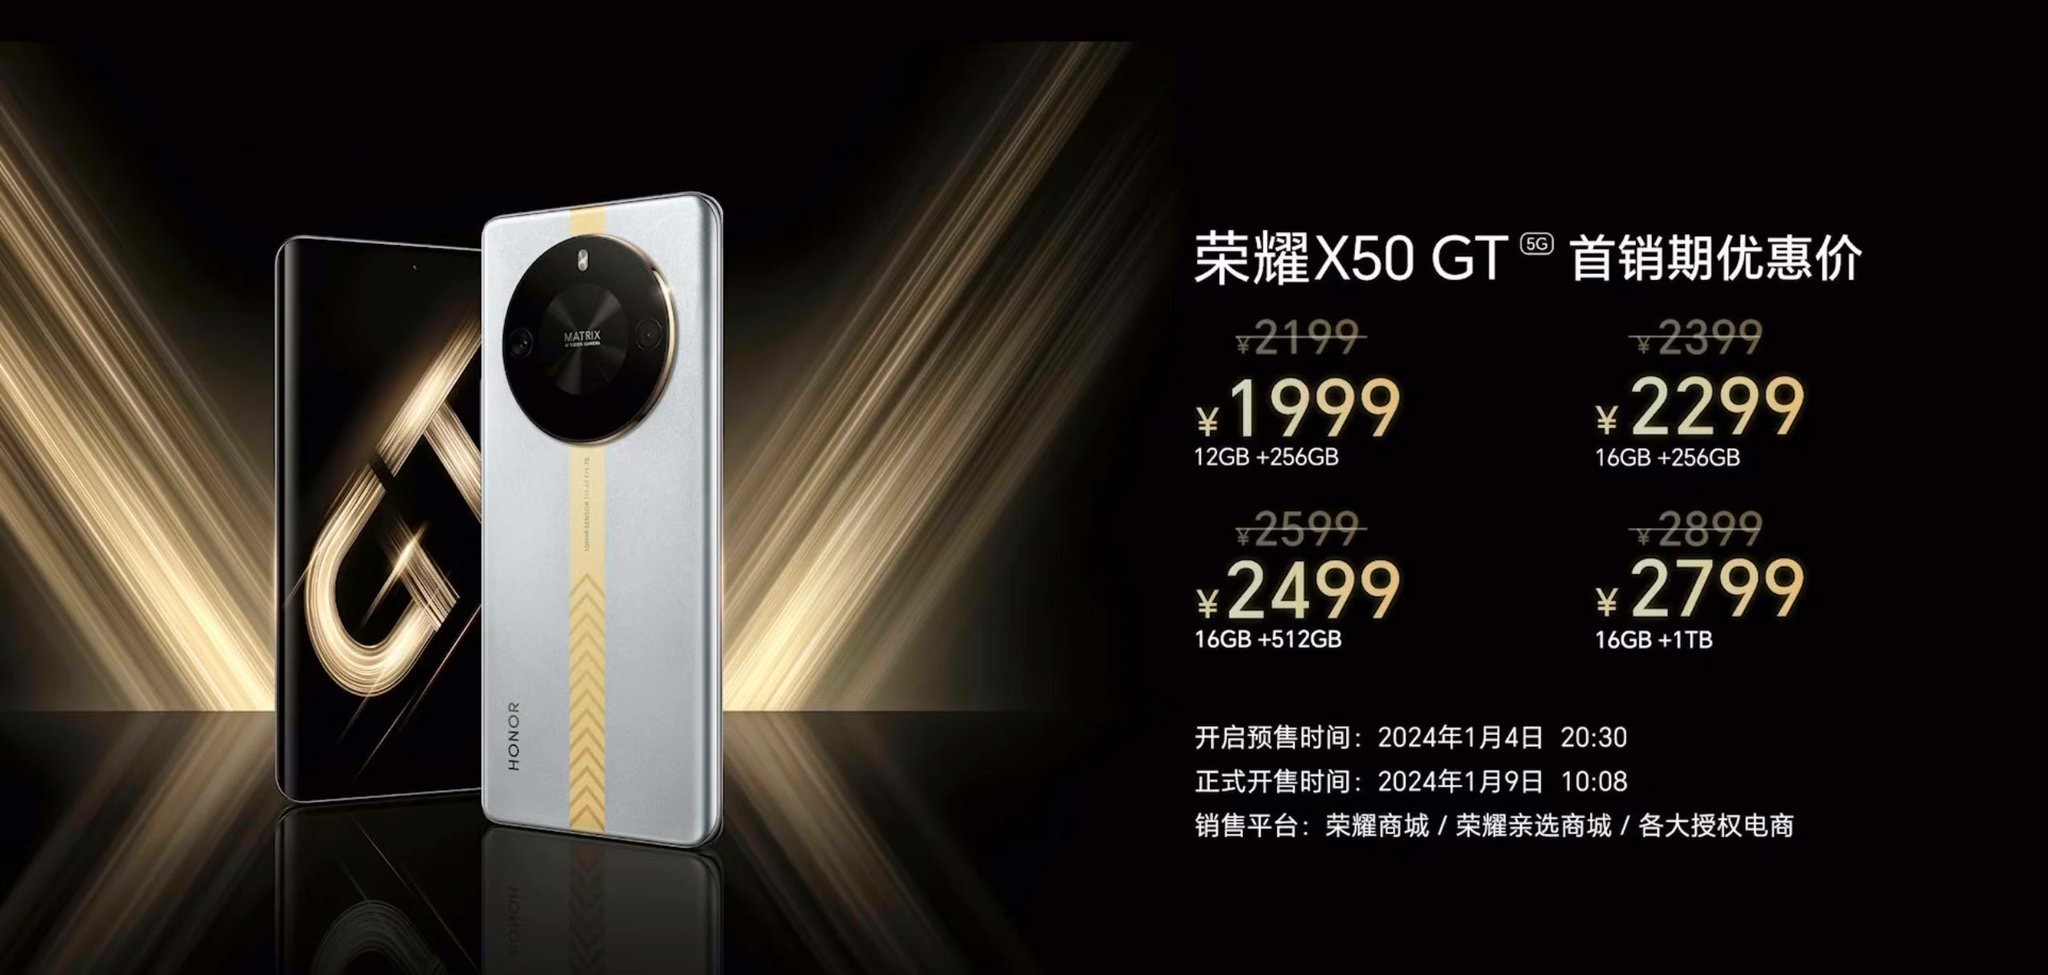 Honor X50 GT: Pricing, Availability & Sale Offers